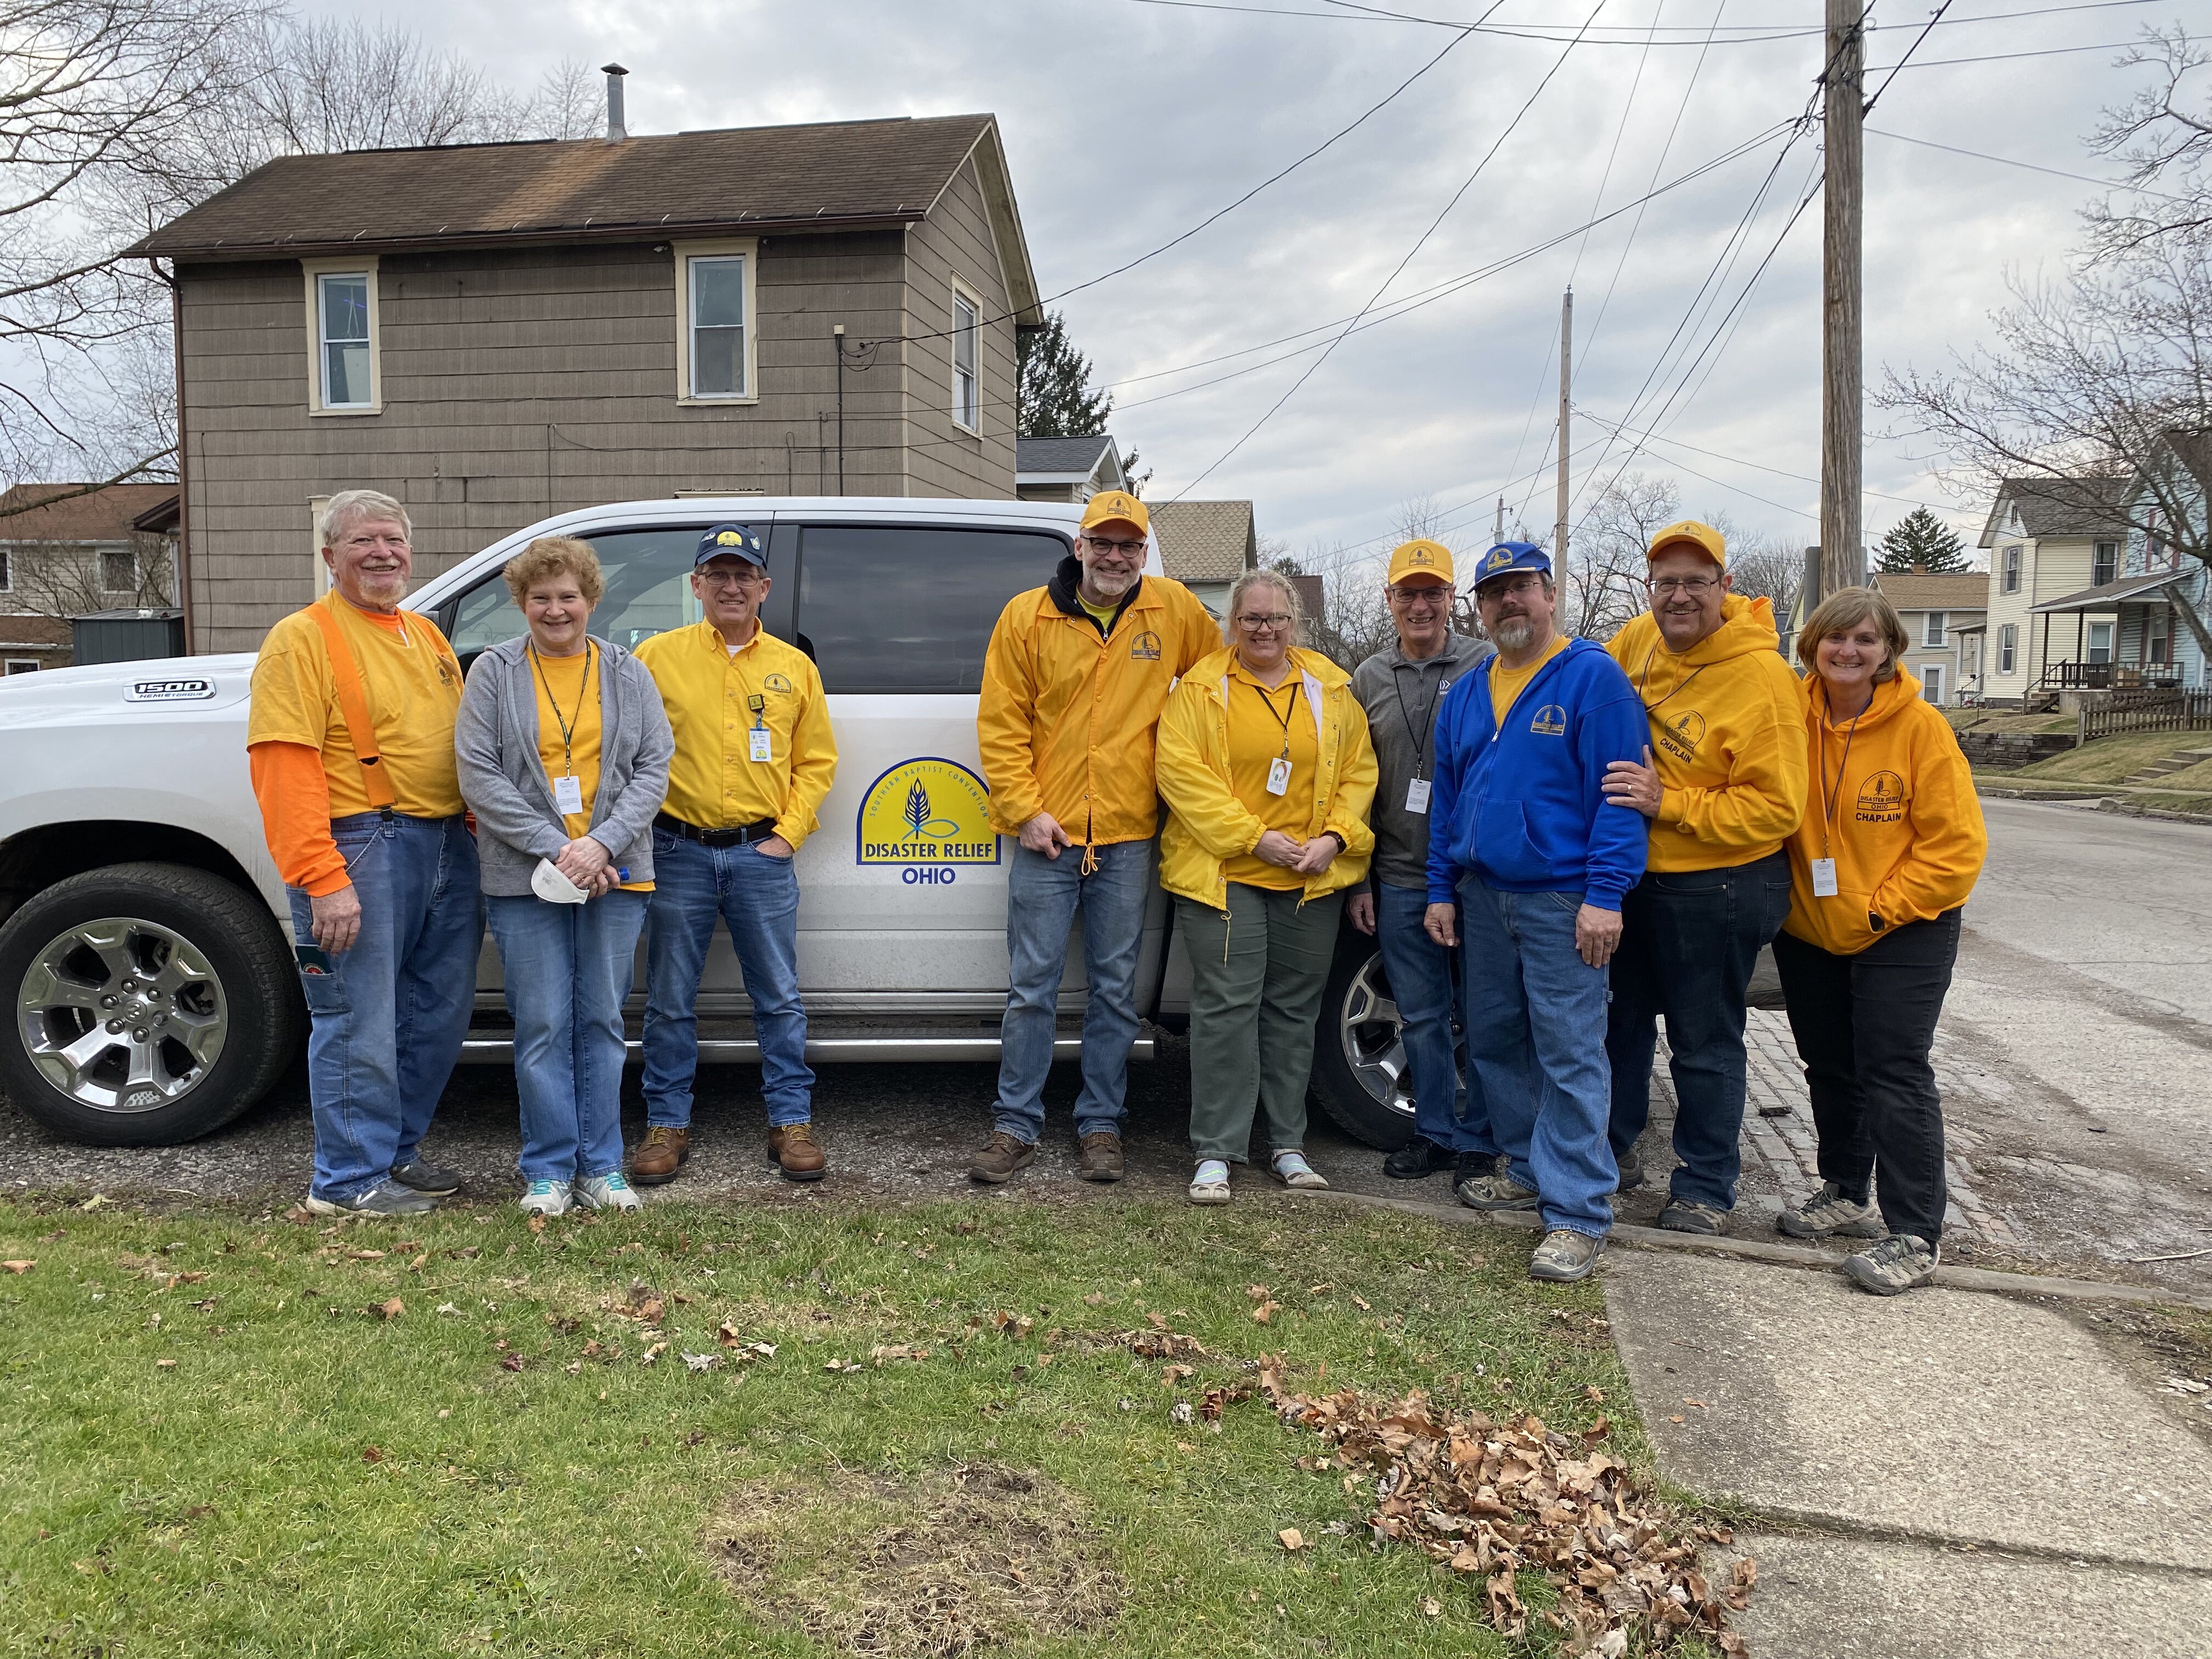 Ohio Southern Baptist Disaster Relief team in East Palestine, Ohio